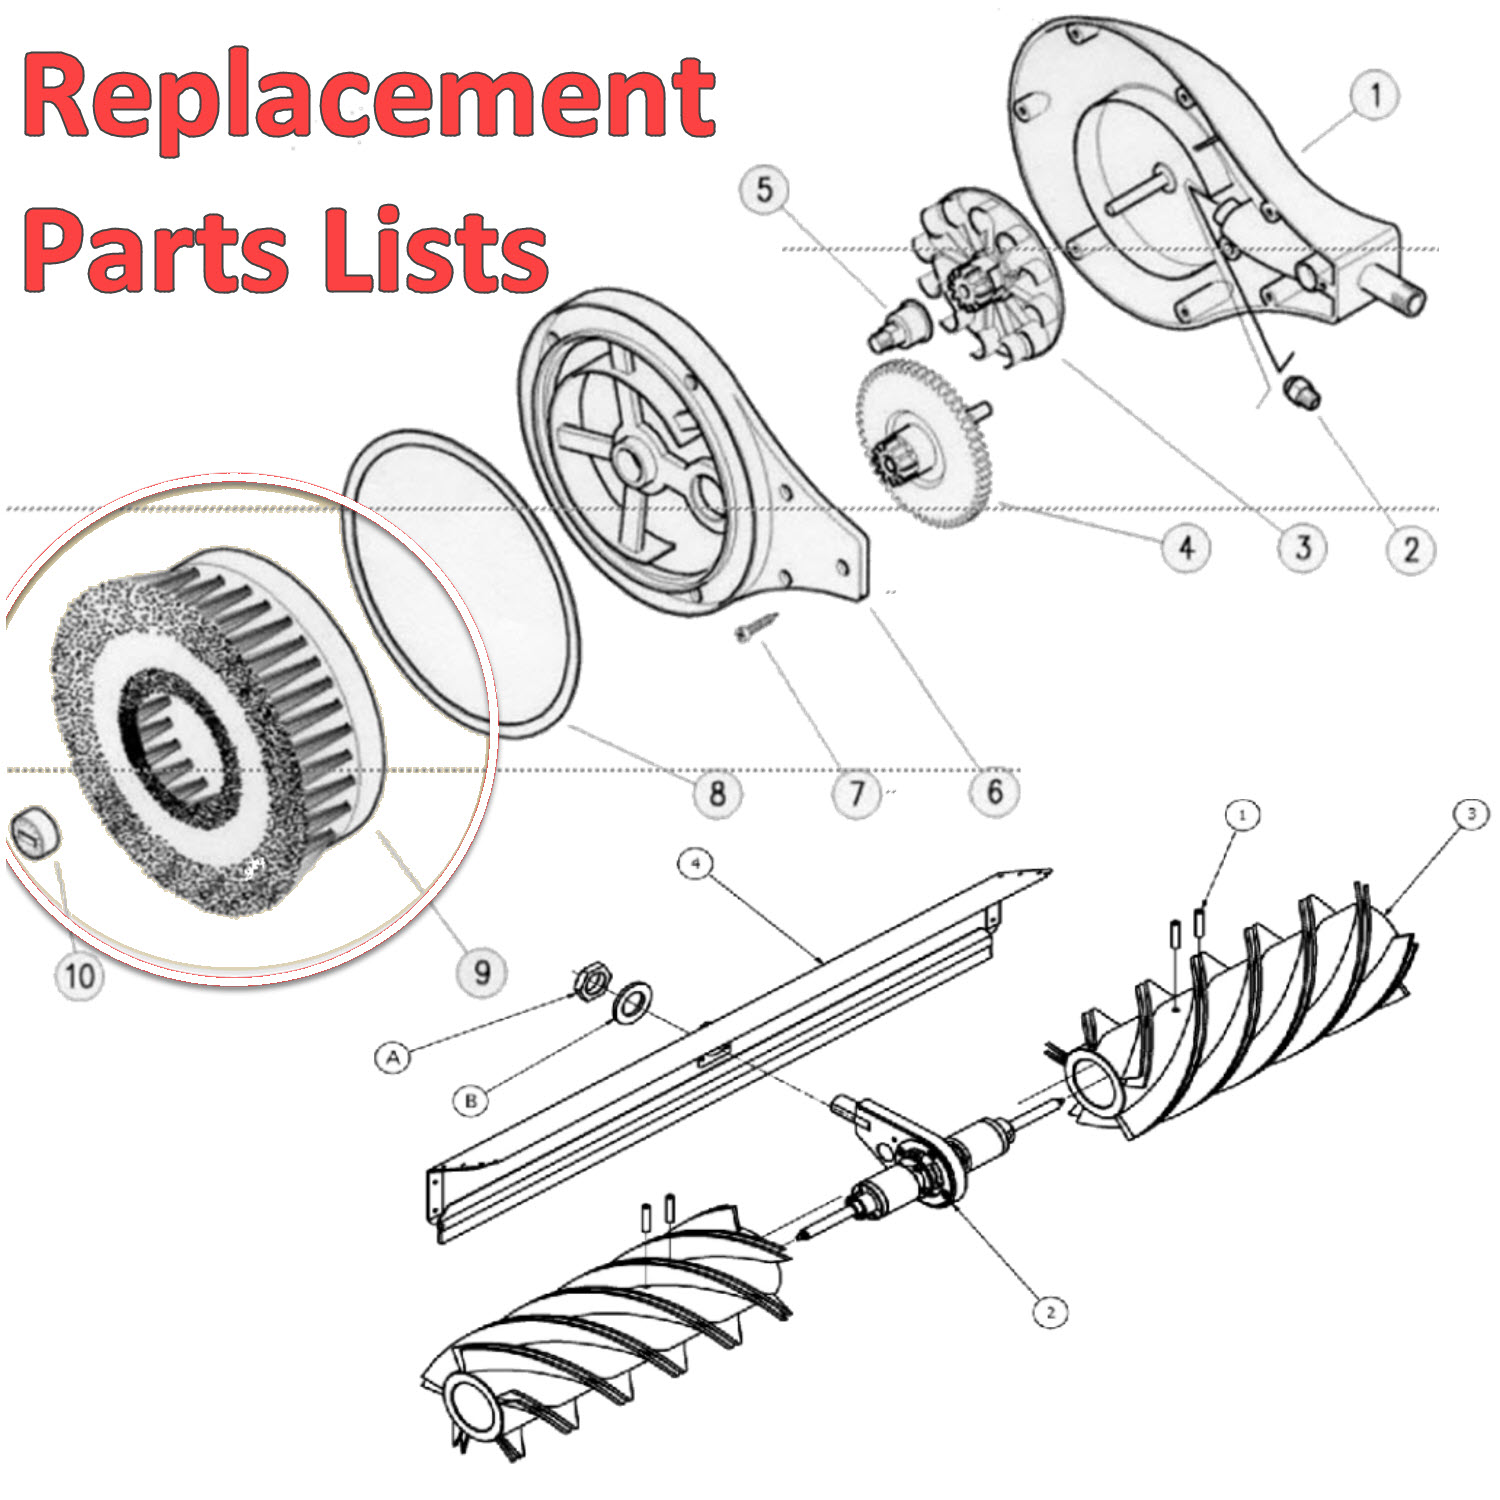 https://www.jracenstein.com/mmjrcnew/images/replacement-parts-lists-c4342.jpg